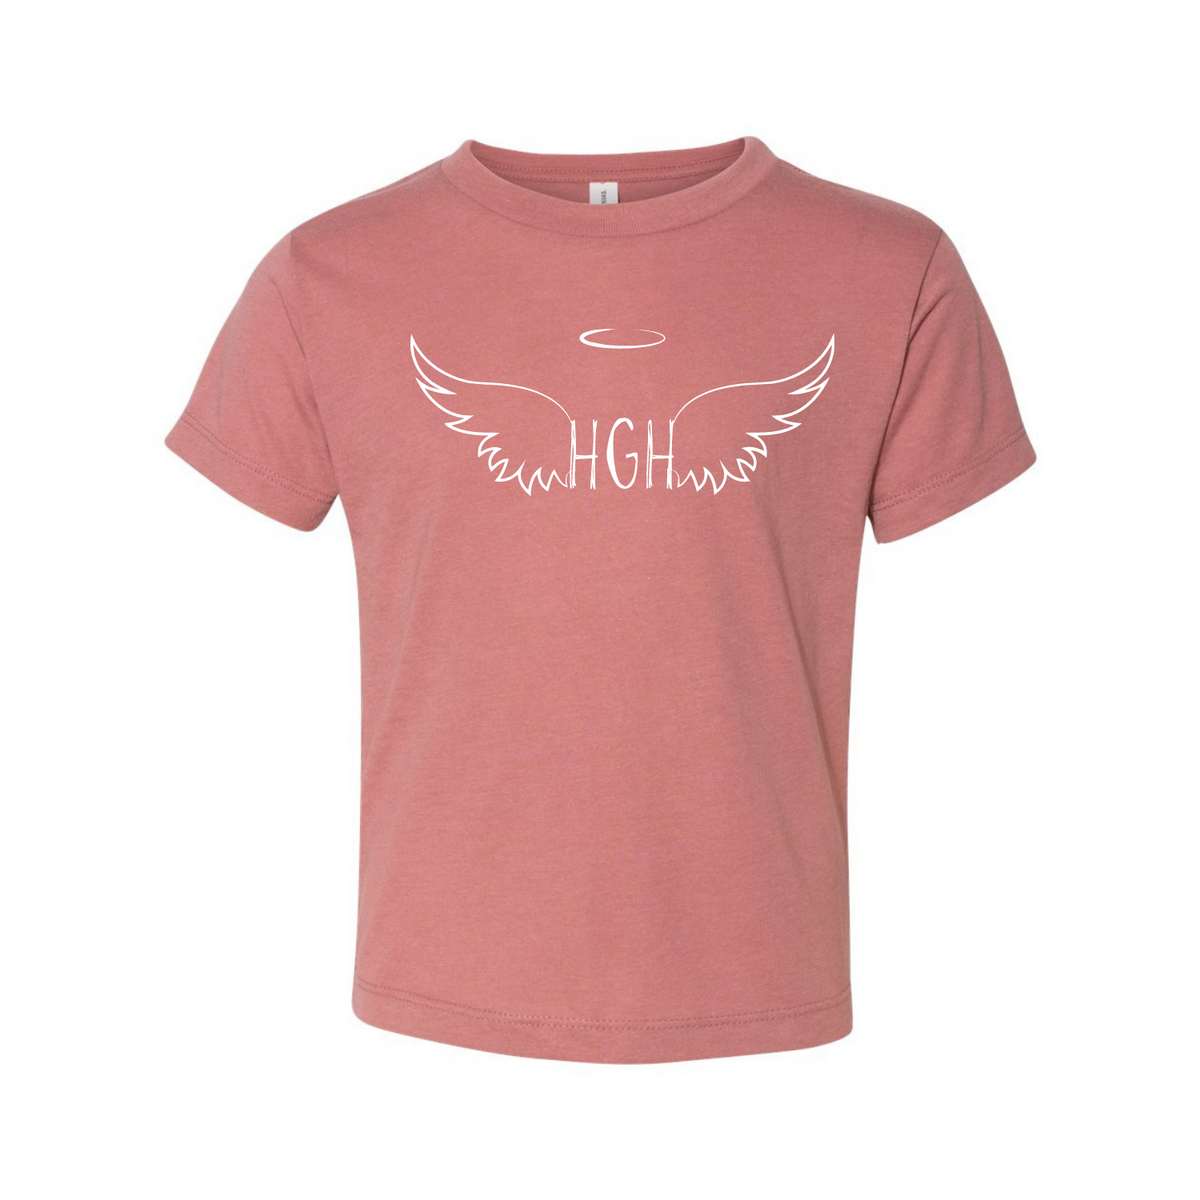 THE HARPER Bella+Canvas® Girls Infant & Youth Tee - 134B/3413T